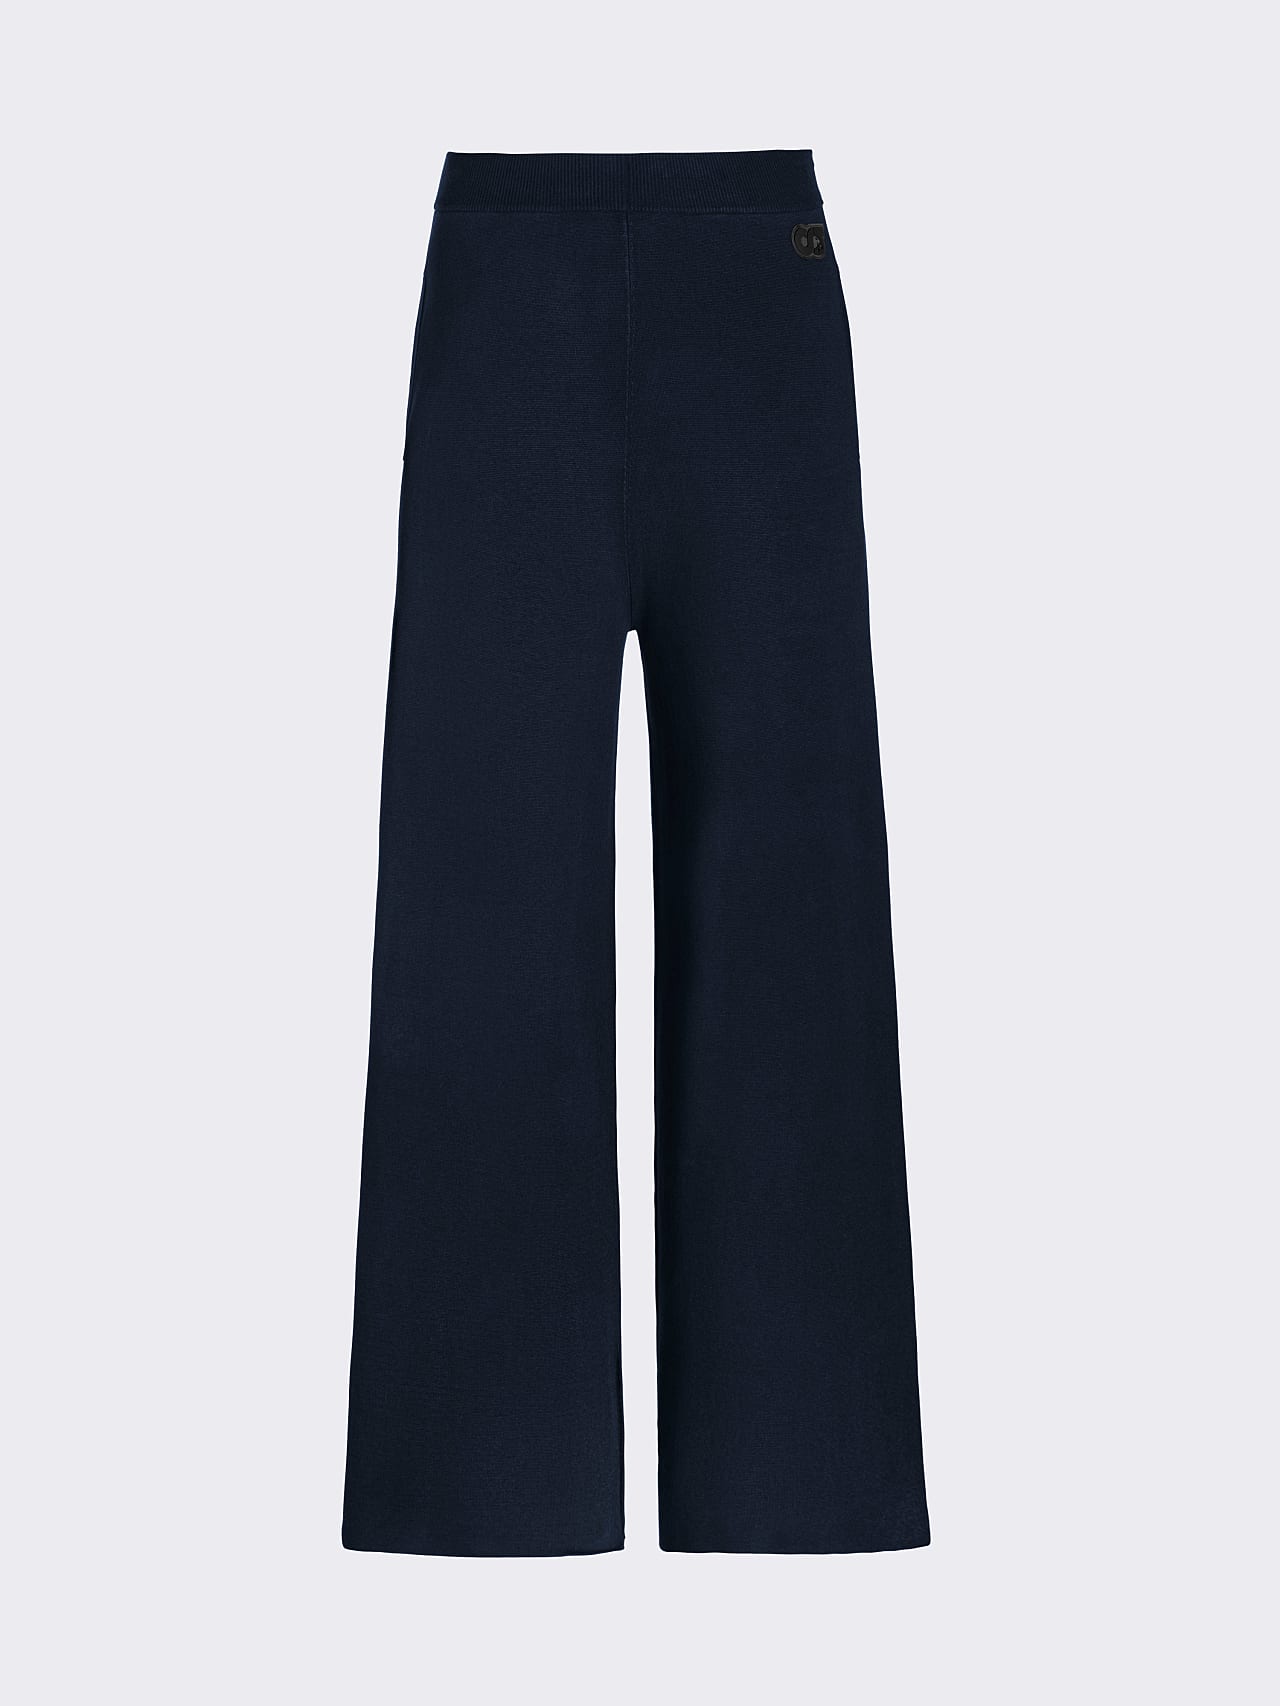 AlphaTauri | PROVI V1.Y5.02 | Seamless 3D Knit Culottes in navy for Women